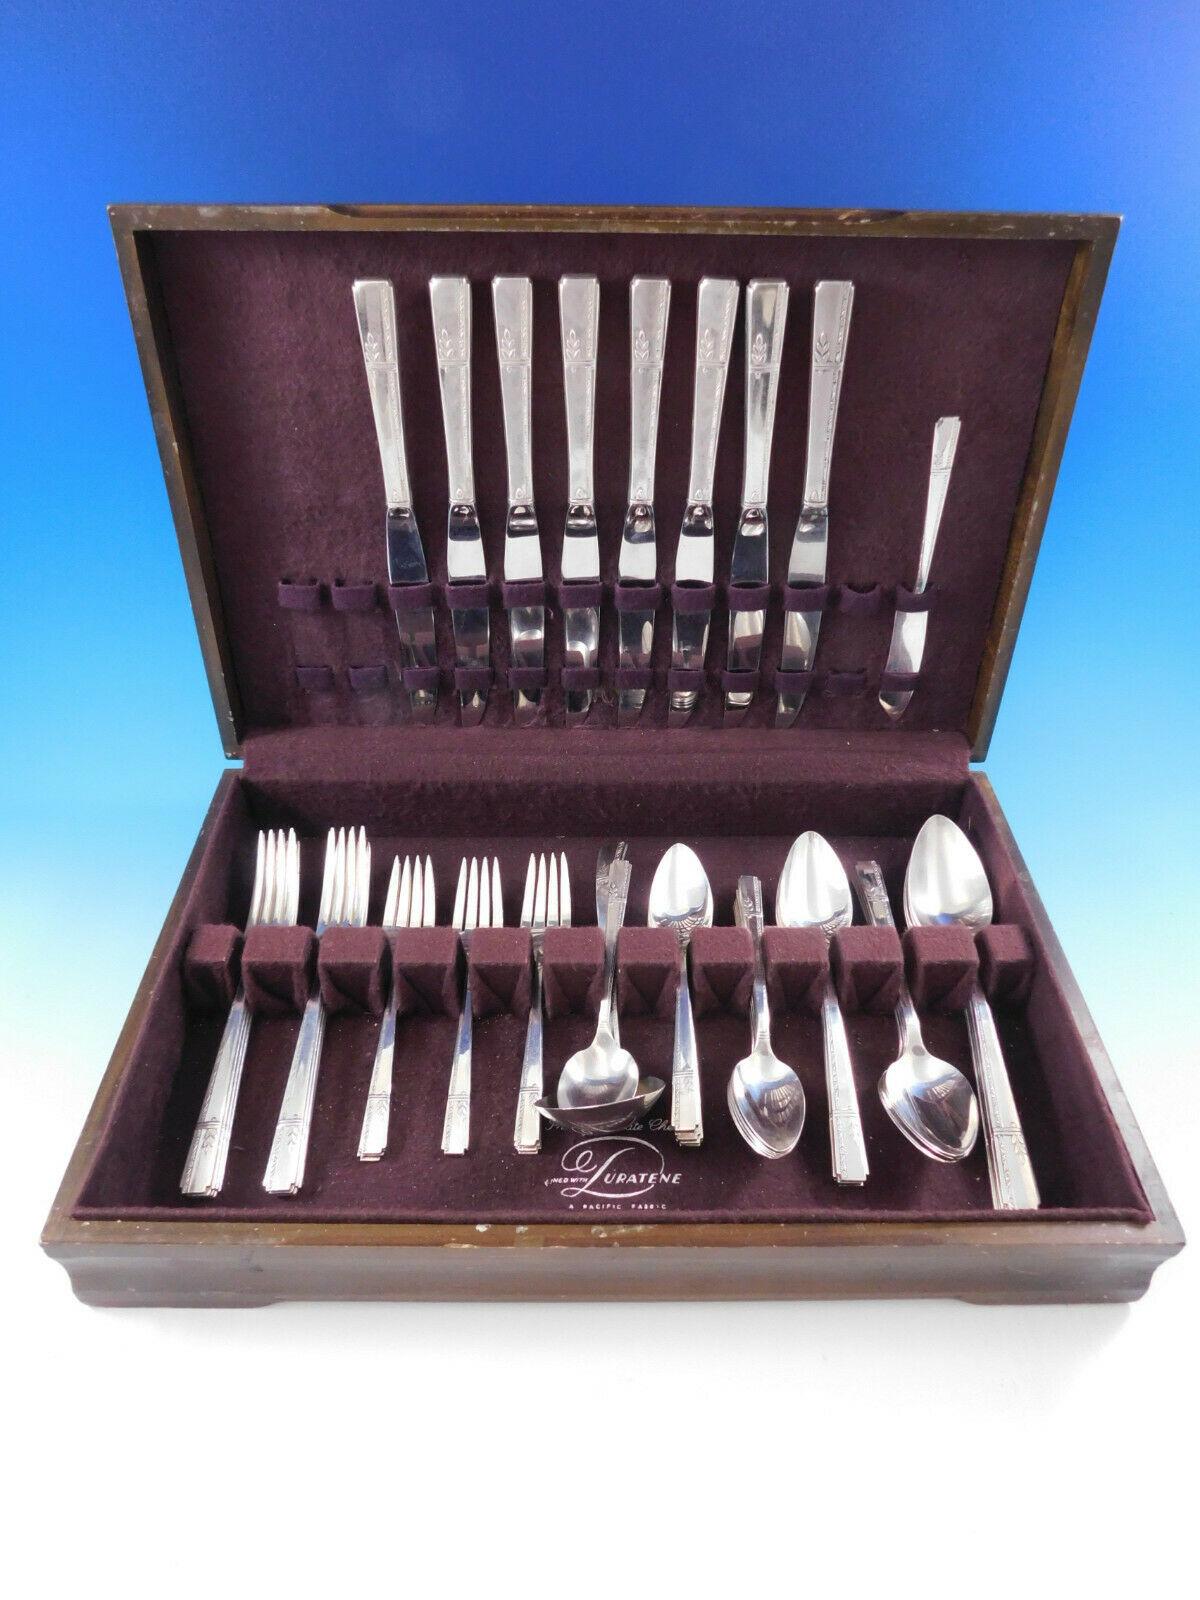 Grenoble by Prestige Oneida silverplate flatware set - 55 pieces. This set includes:

8 knives, 9 1/4